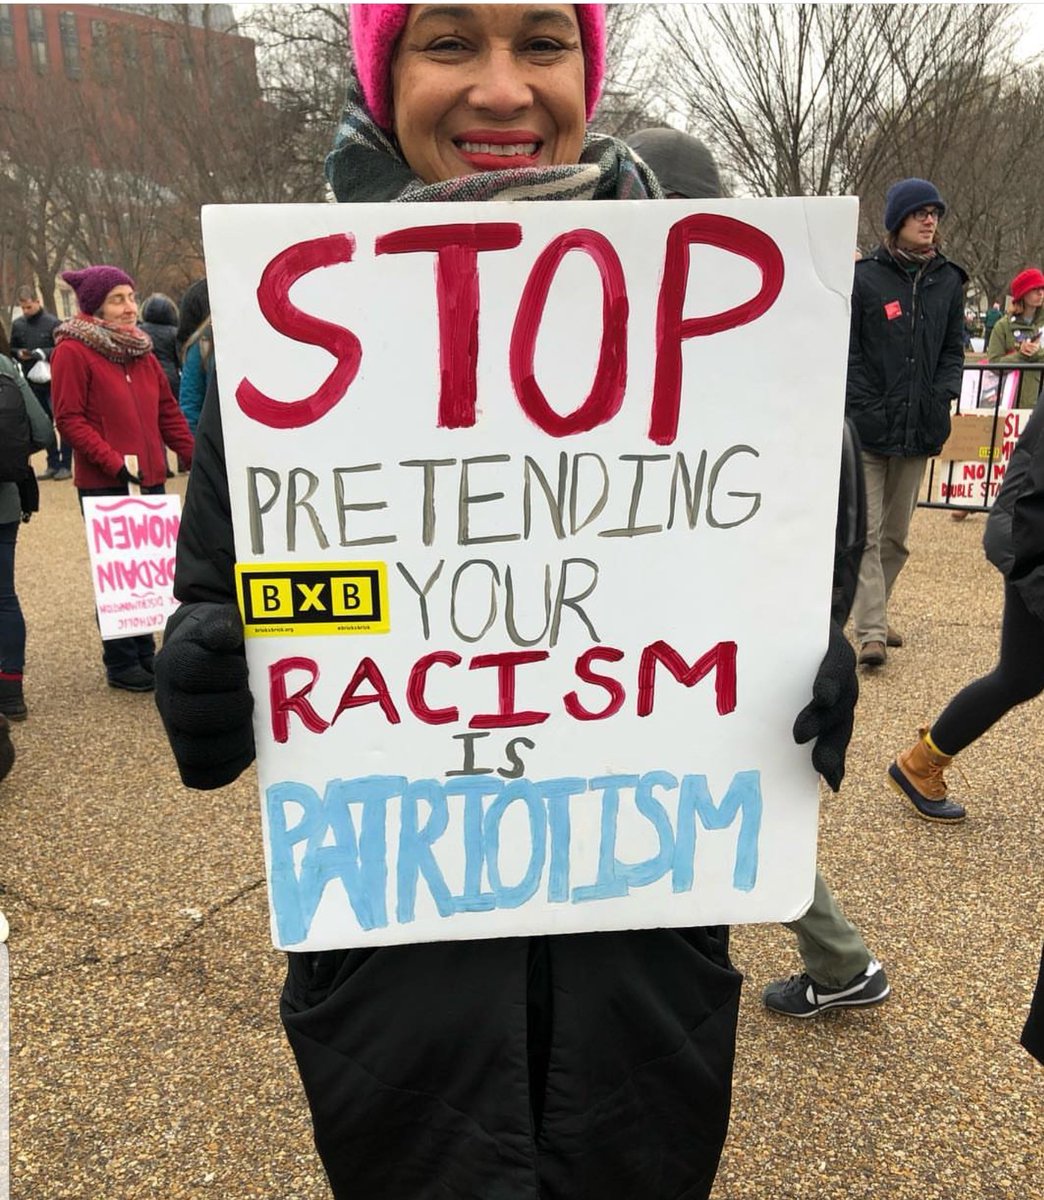 'Stop pretending your racism is patriotism.' This sign from today's #WomensMarch2019 is how I feel when individual-1 talks about the wall.